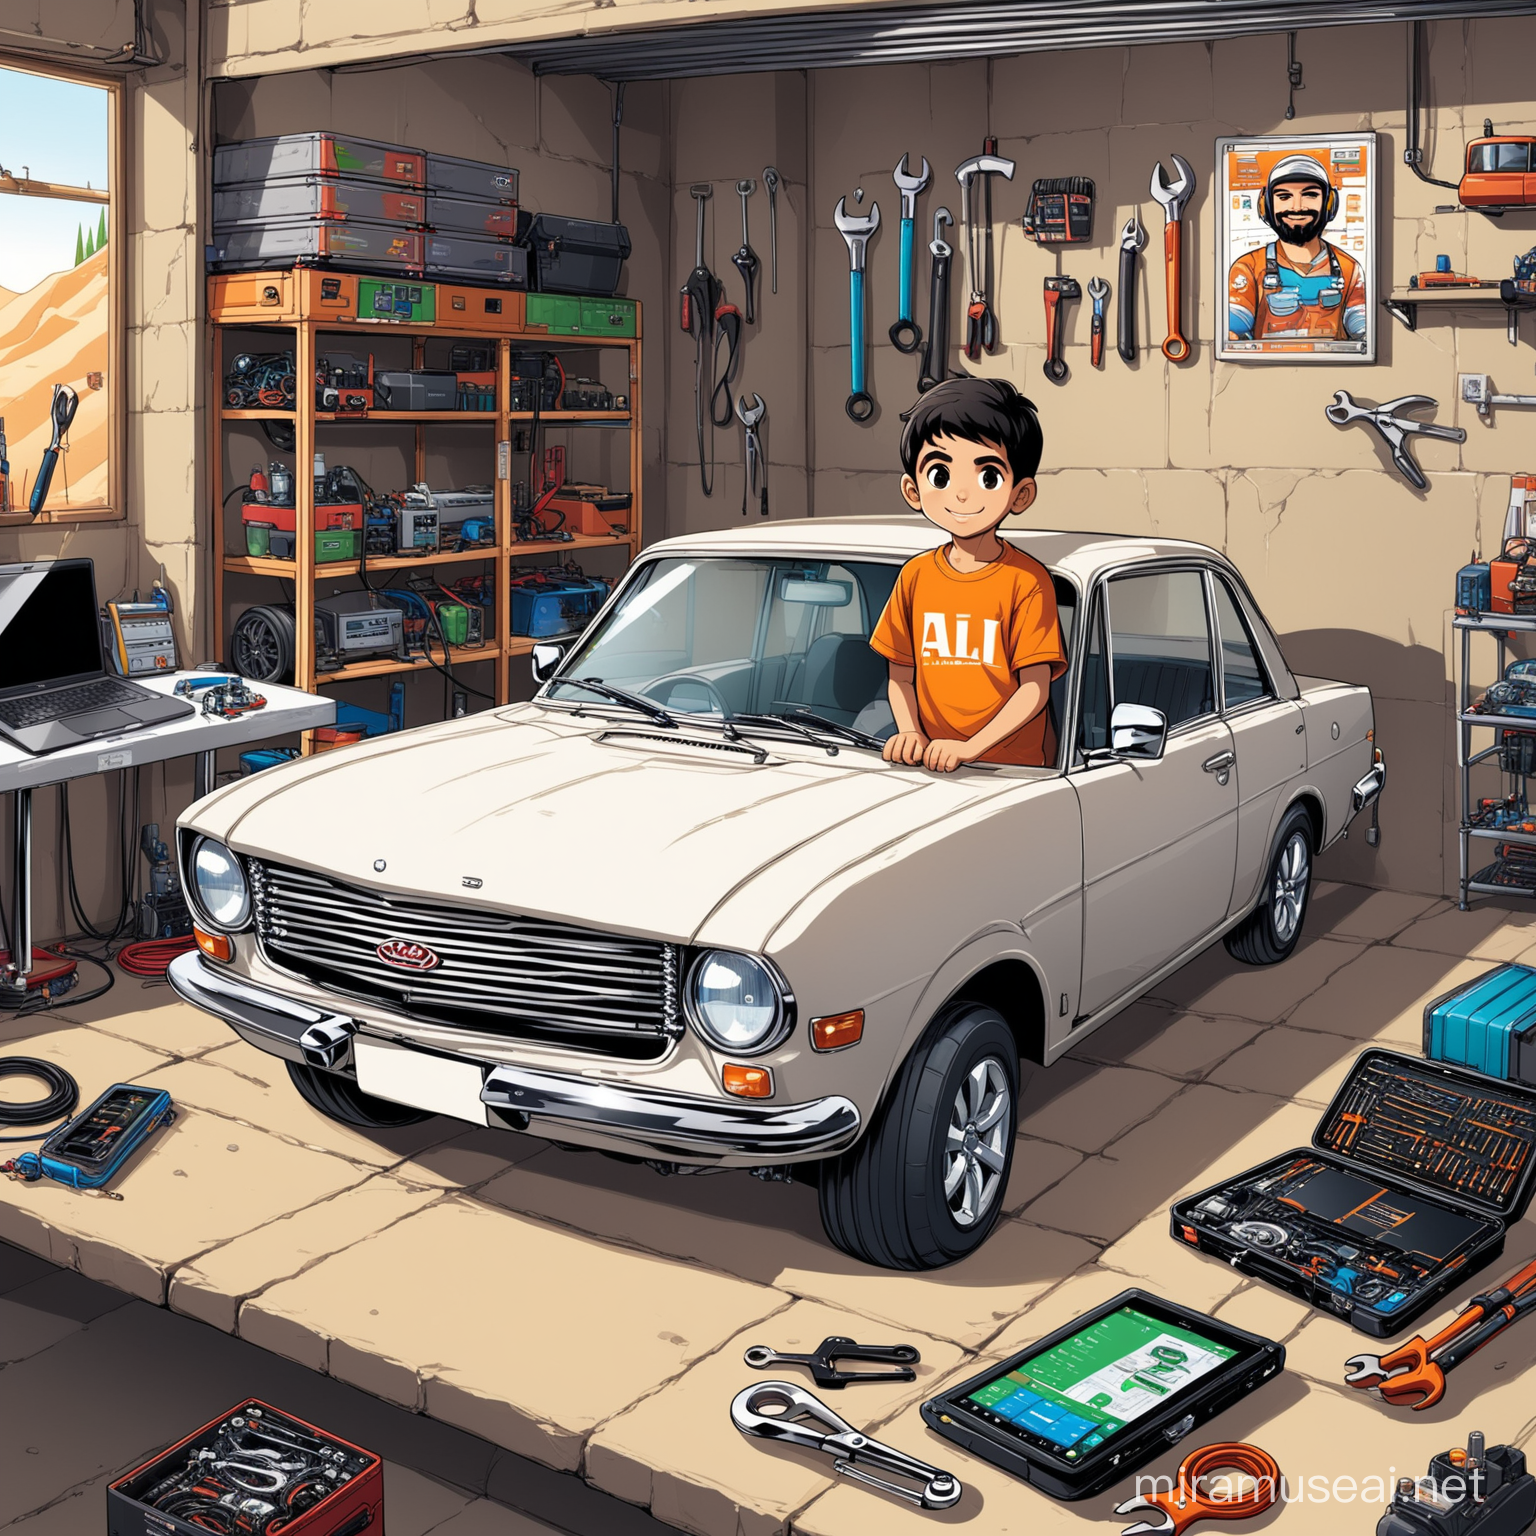 Ali is a Persian little boy, 8 years old, cute, white skin, smiling.

Samandcr is a modern Samand car manufactured by Iran Khodro(IKCO), the hood is open, engine is visible.

Ali is repairing Samandcr with a super modern wrench.

Atmosphere super modern auto repair shop cartoon, laptops, auto repairing tools and devices, car tuning devices, in monitor screen showing a car differential.

On the walls monitors, tools.

Clothes of Ali is full of Persian designs.